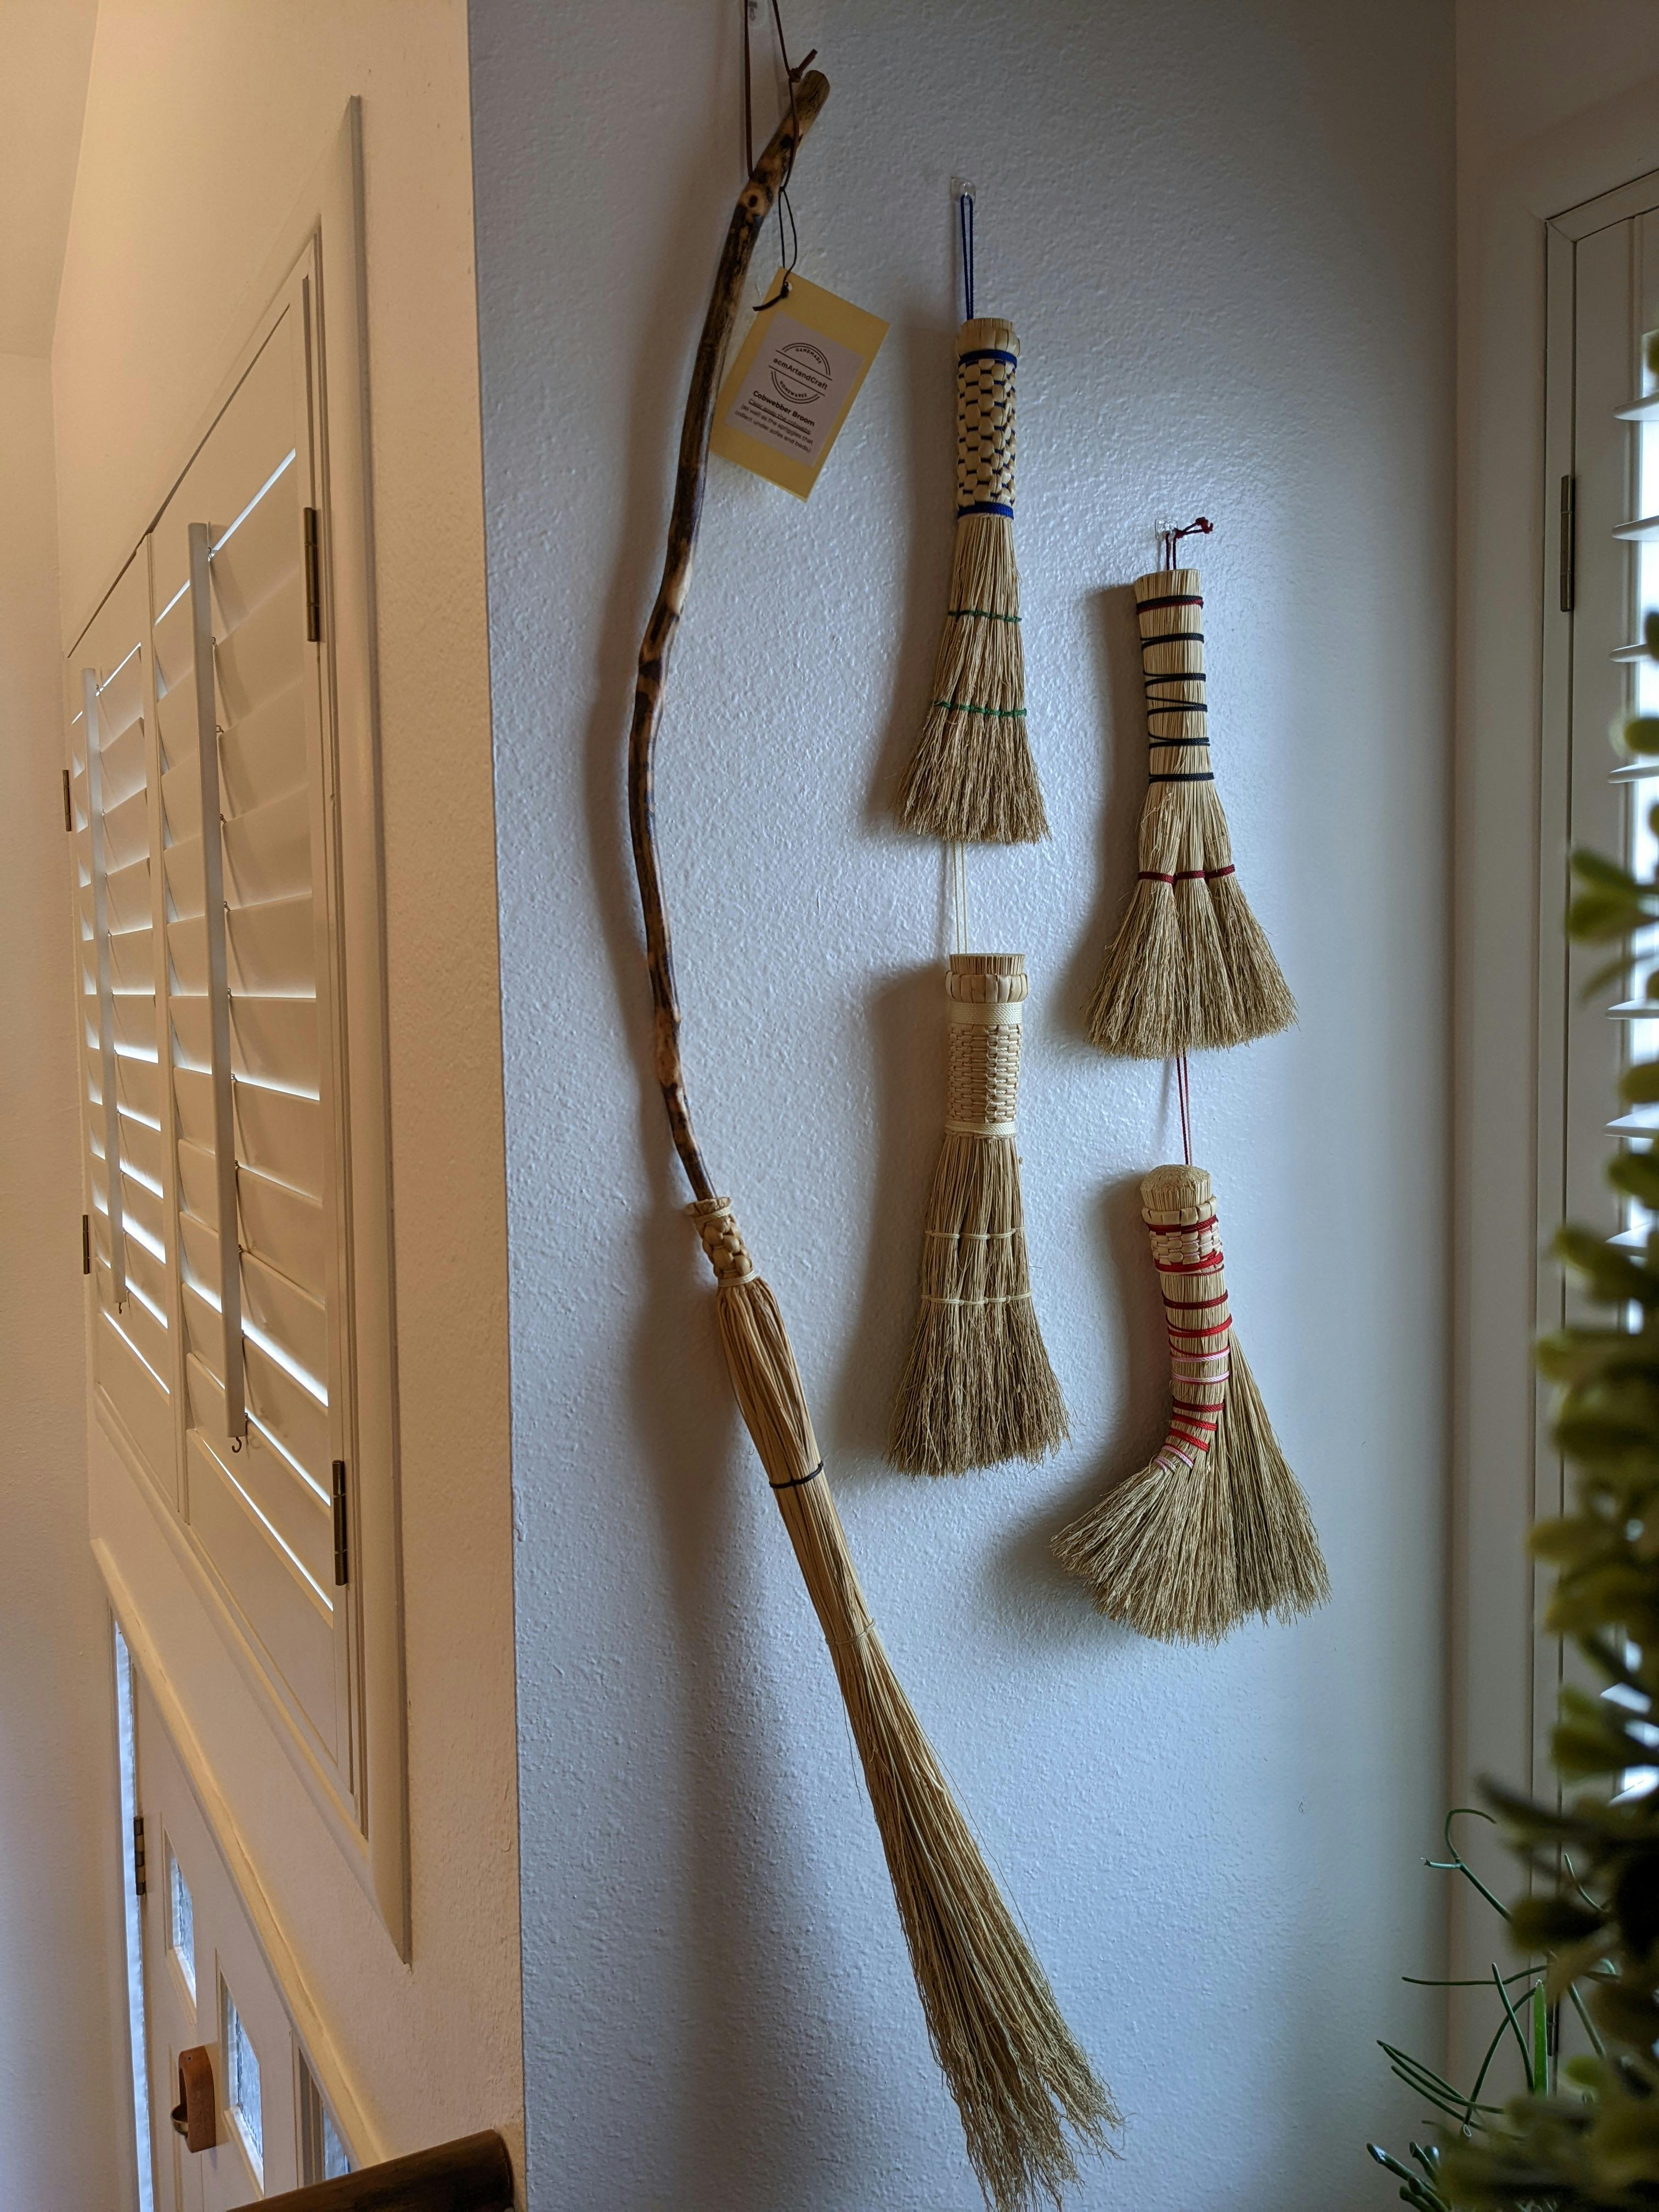 Designer Broom - both artistic AND functional